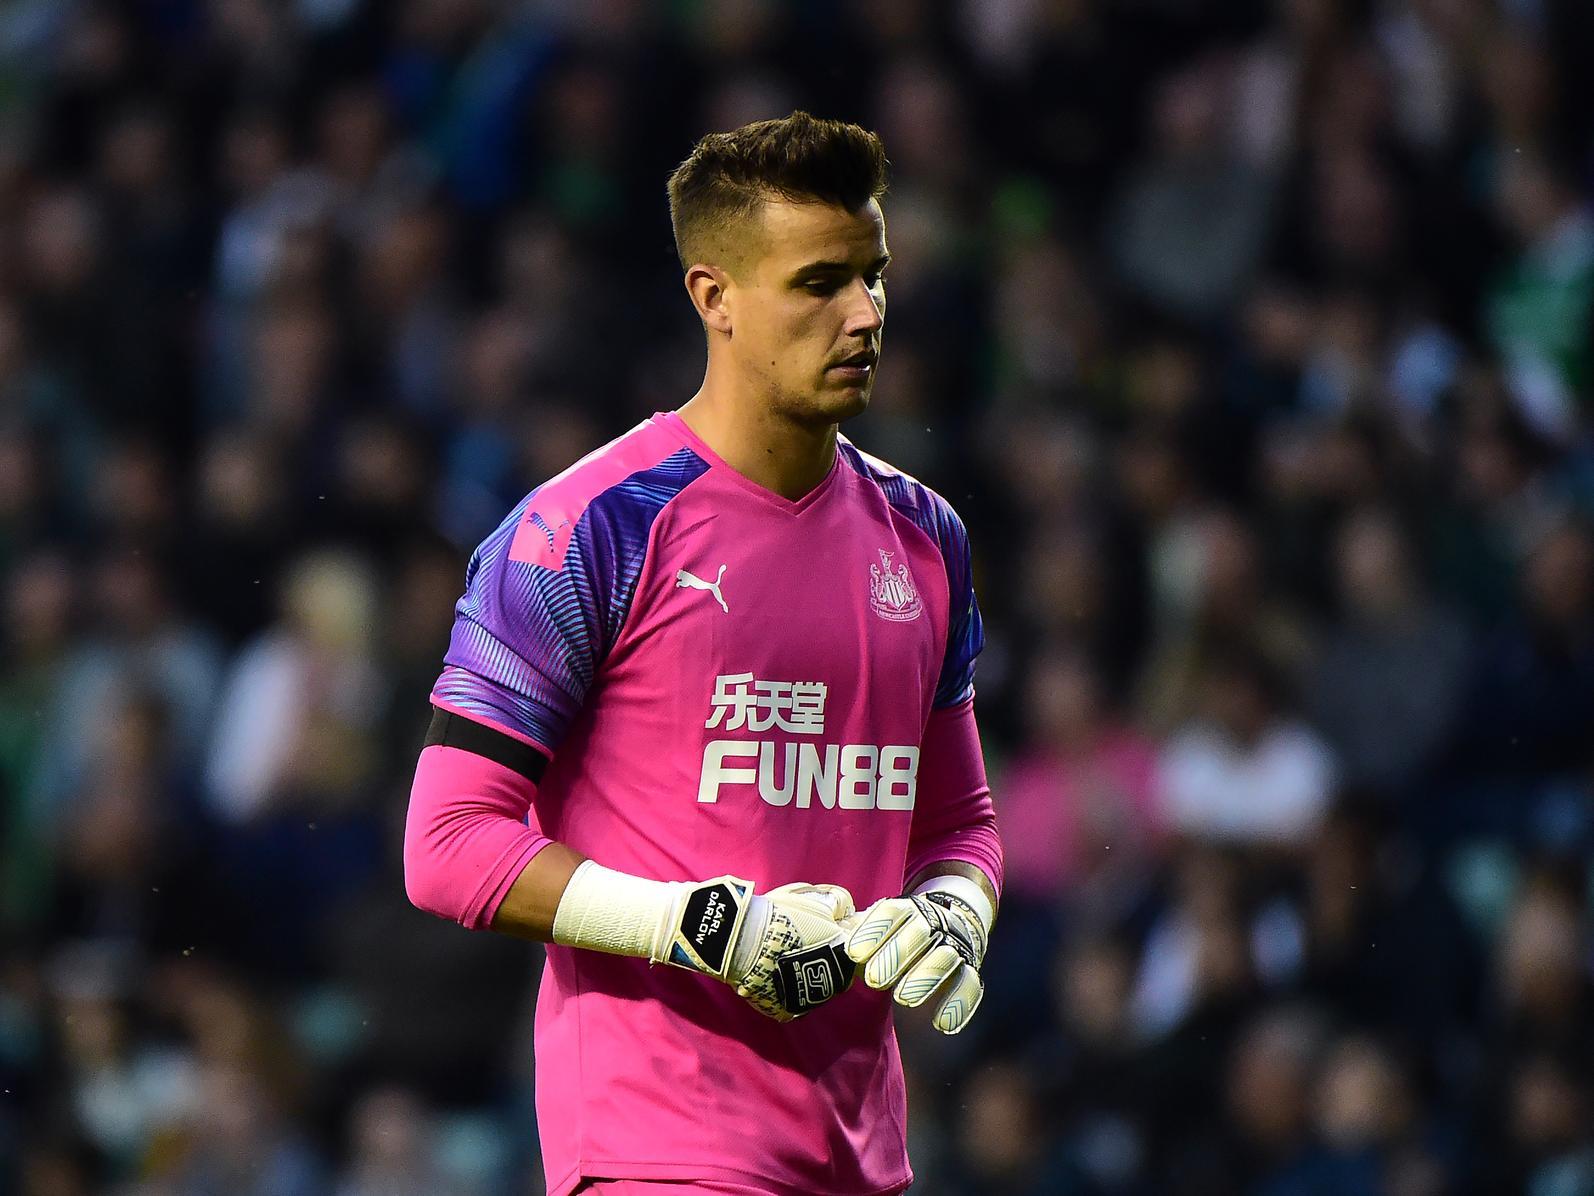 A fine backup option on the bench, Darlow even stepped in as caretaker manager at the tender age of 32 during a bit of a club crisis (more on that later).